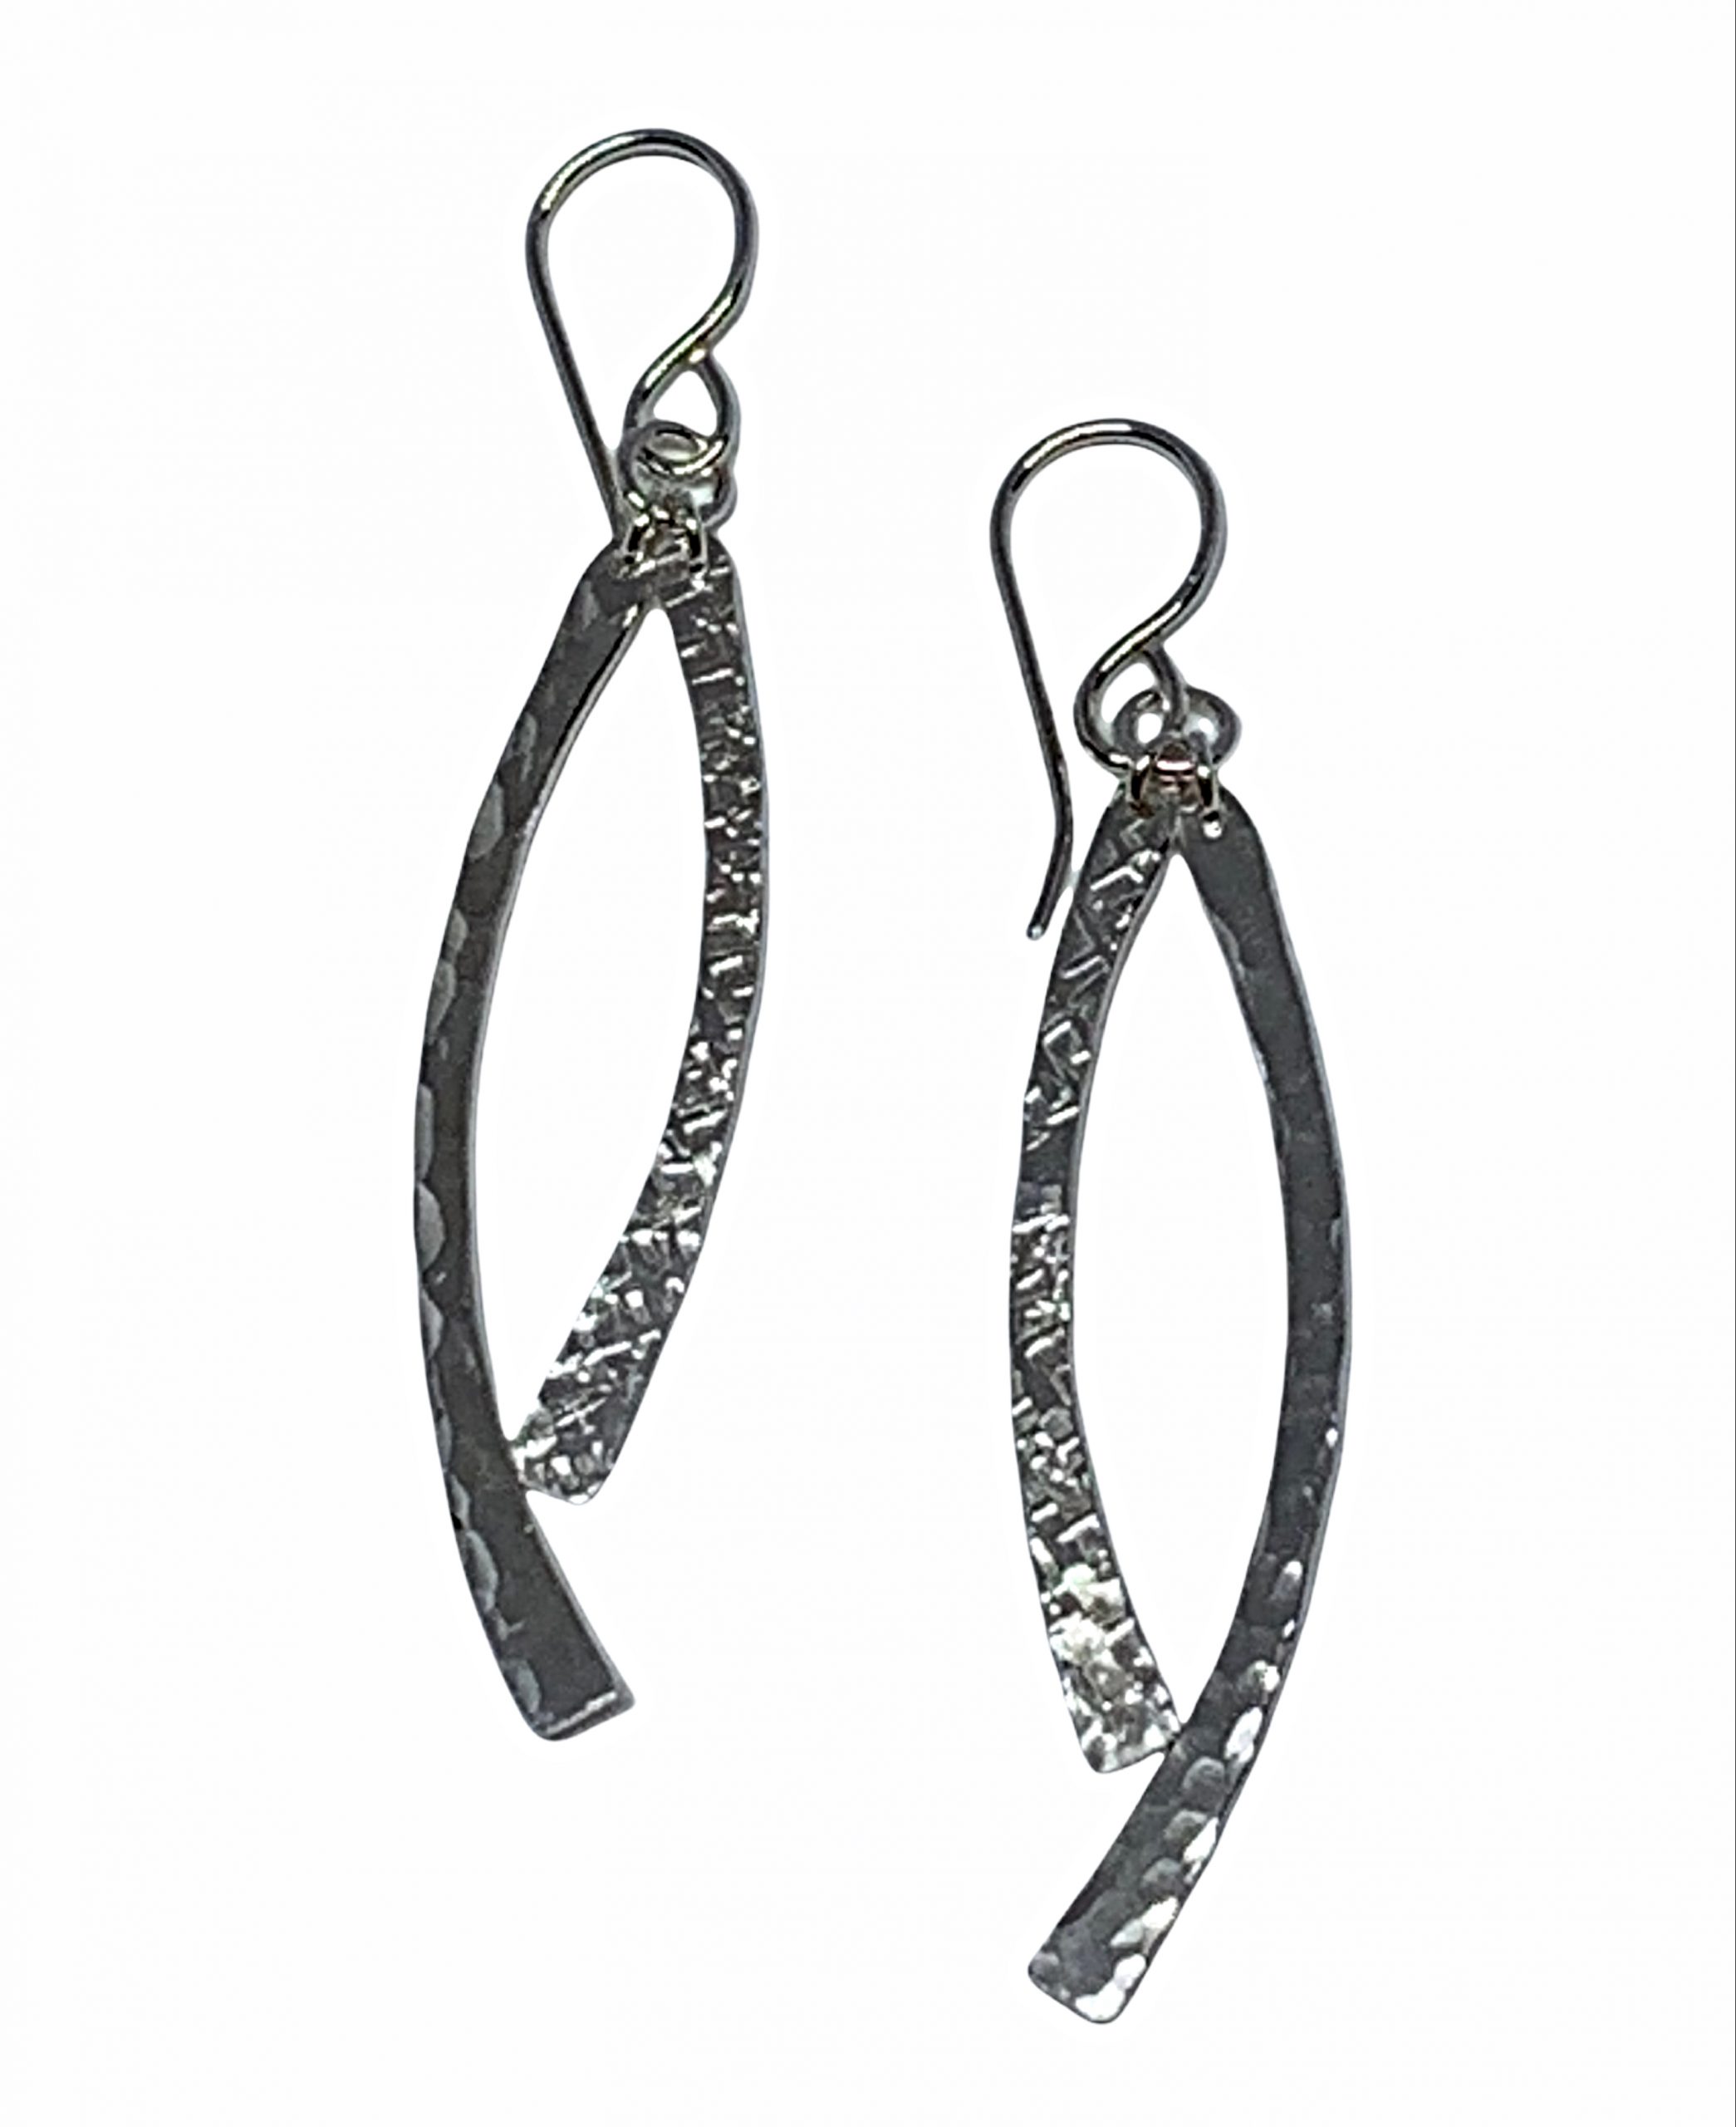 Handmade sterling silver earrings by A&R Jewellery | Effusion Art Gallery + Cast Glass Studio, Invermere BC